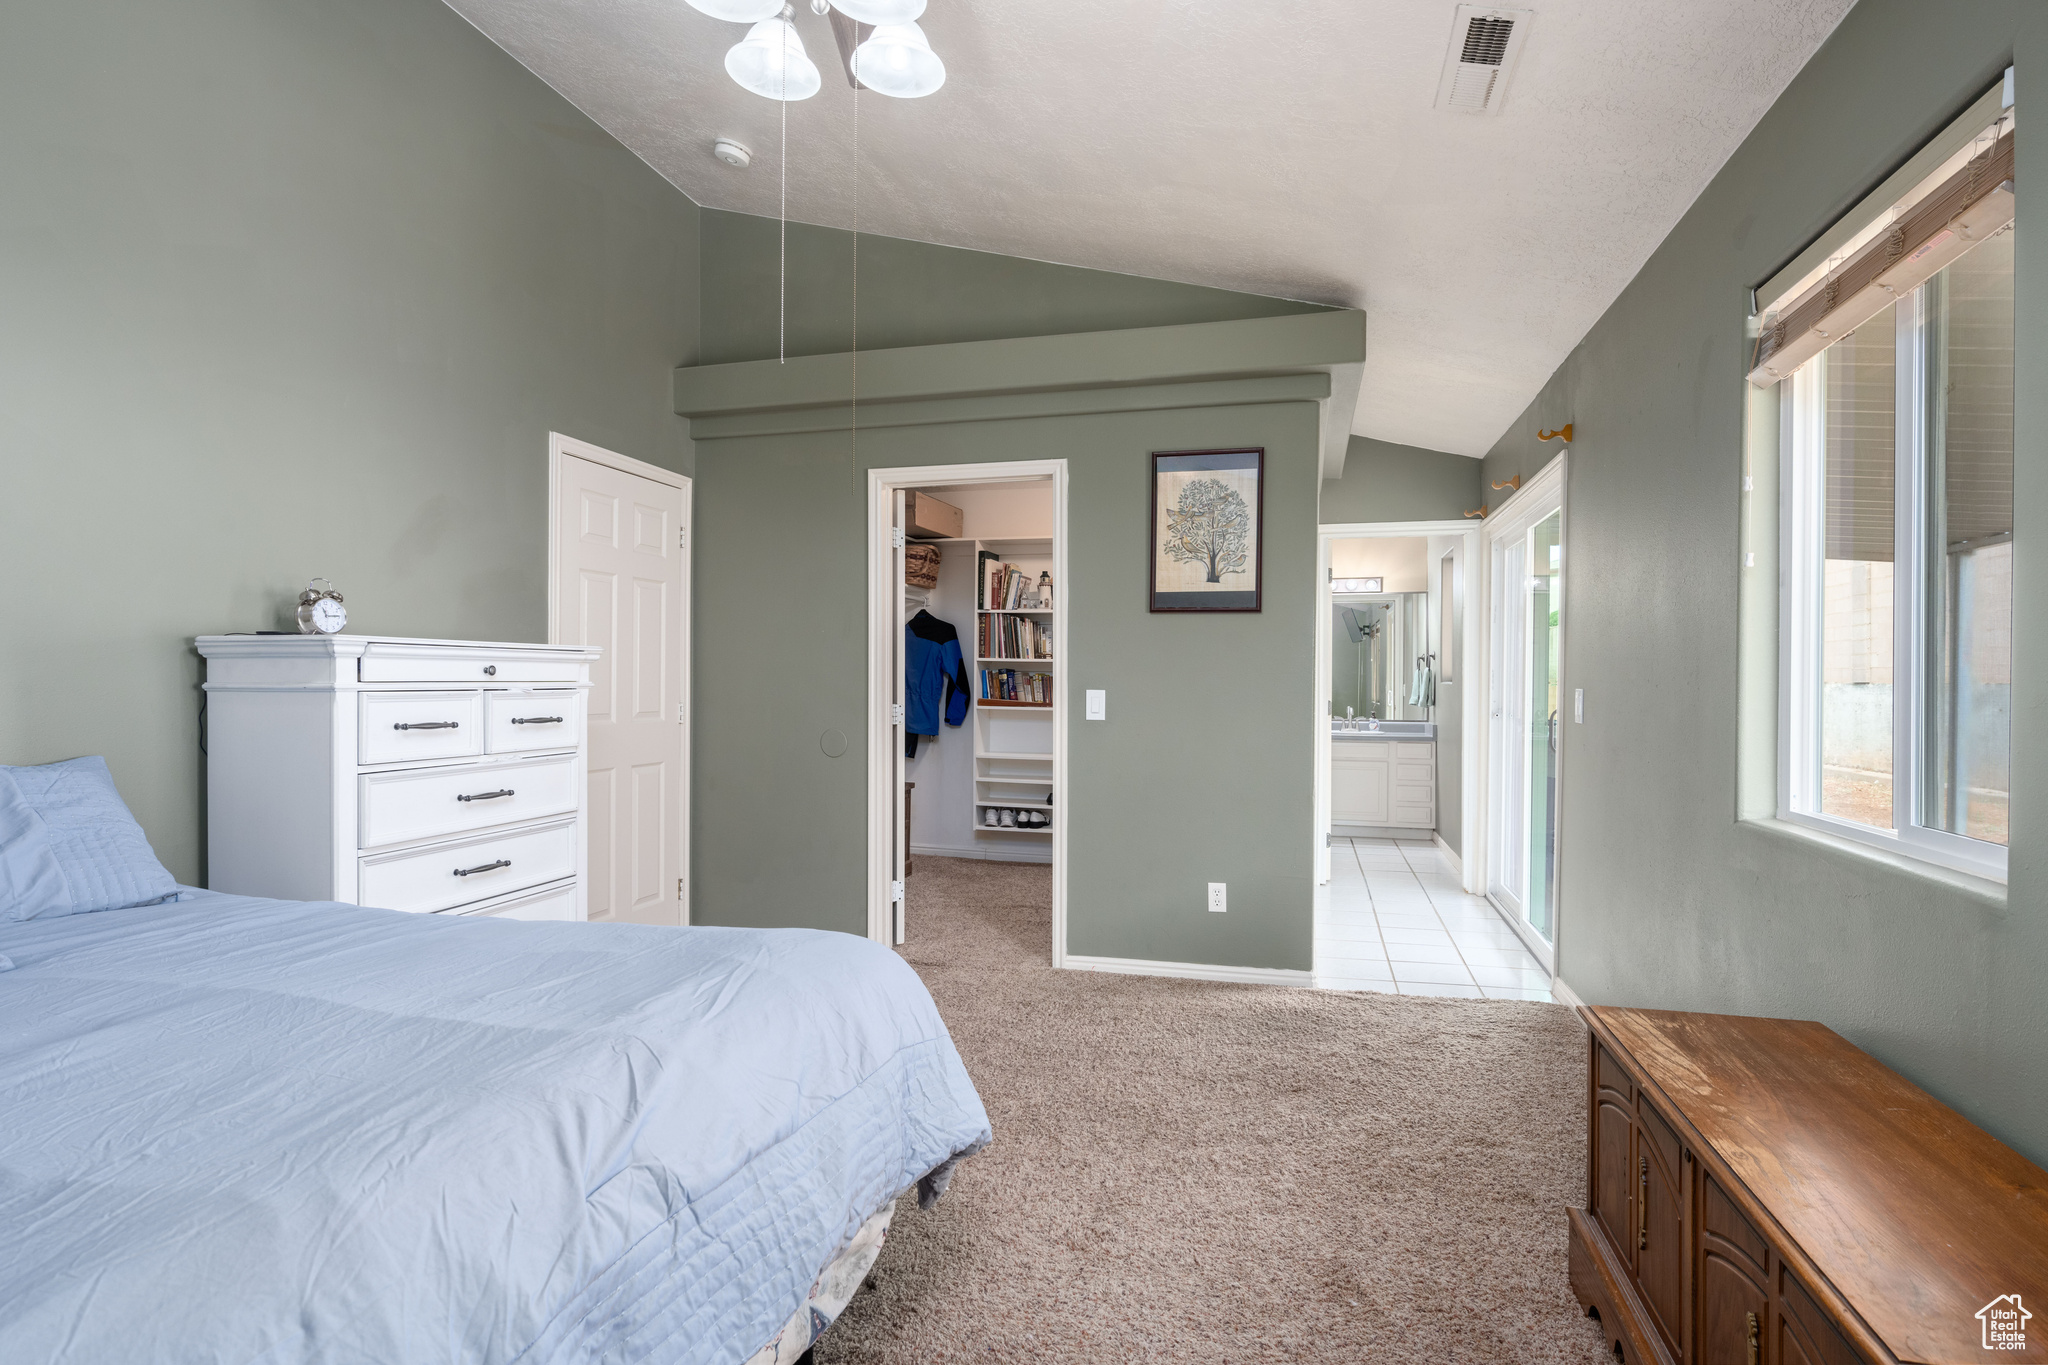 Carpeted bedroom featuring ensuite bath, a spacious closet, a closet, and vaulted ceiling